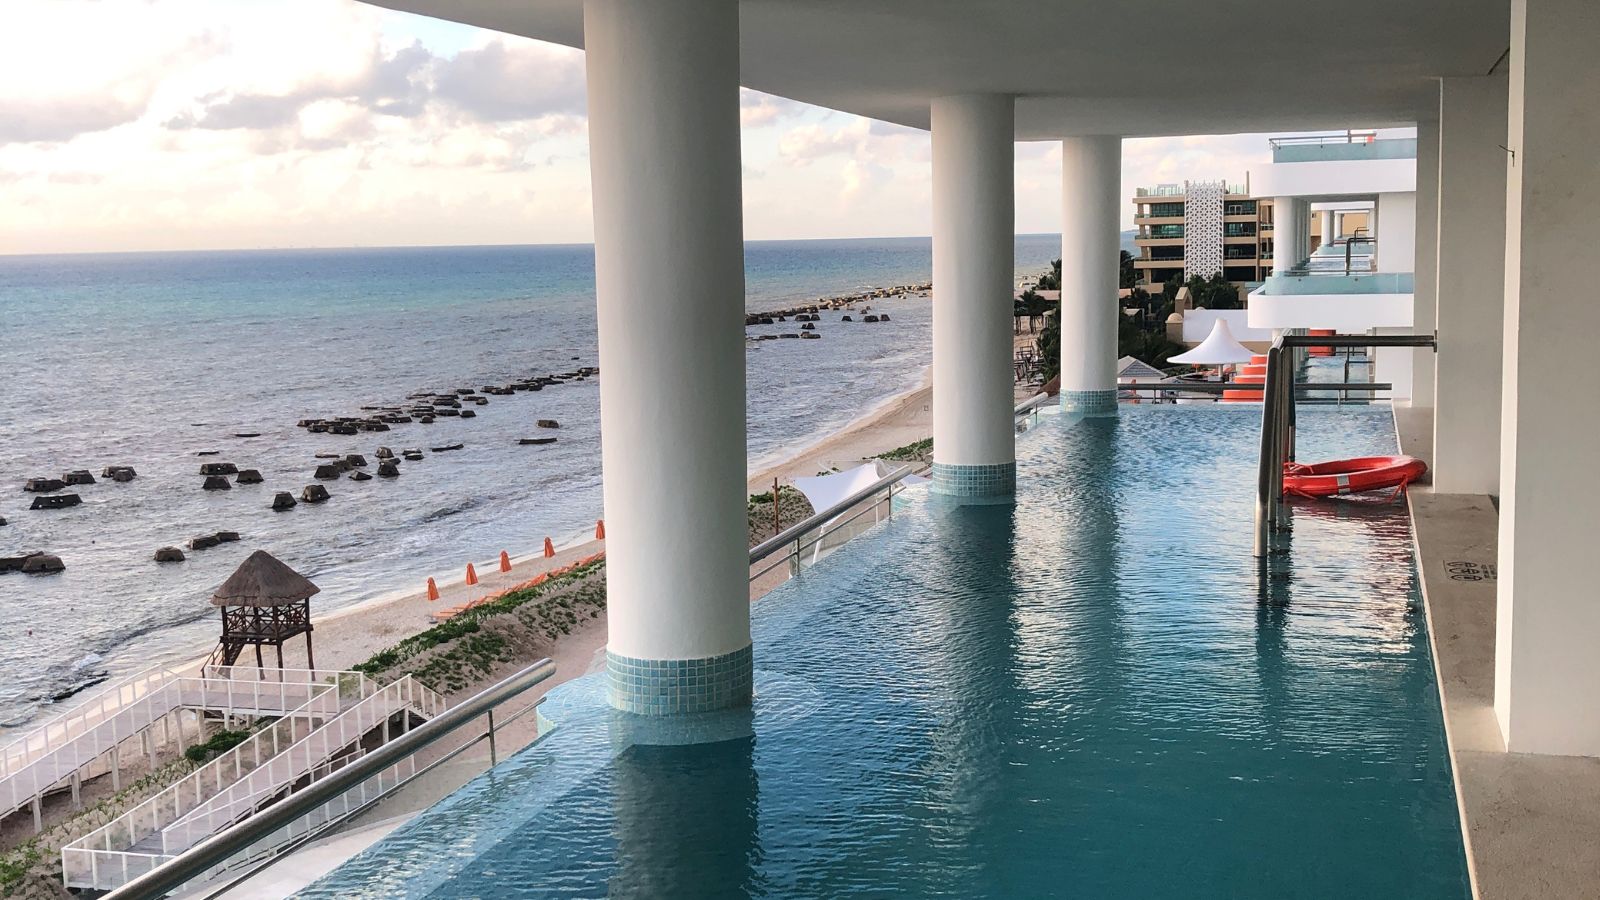 Every guest room is a swim up oceanfront suite at Nickelodeon Hotels and Resorts Riviera Maya (Photo: Josh Roberts)